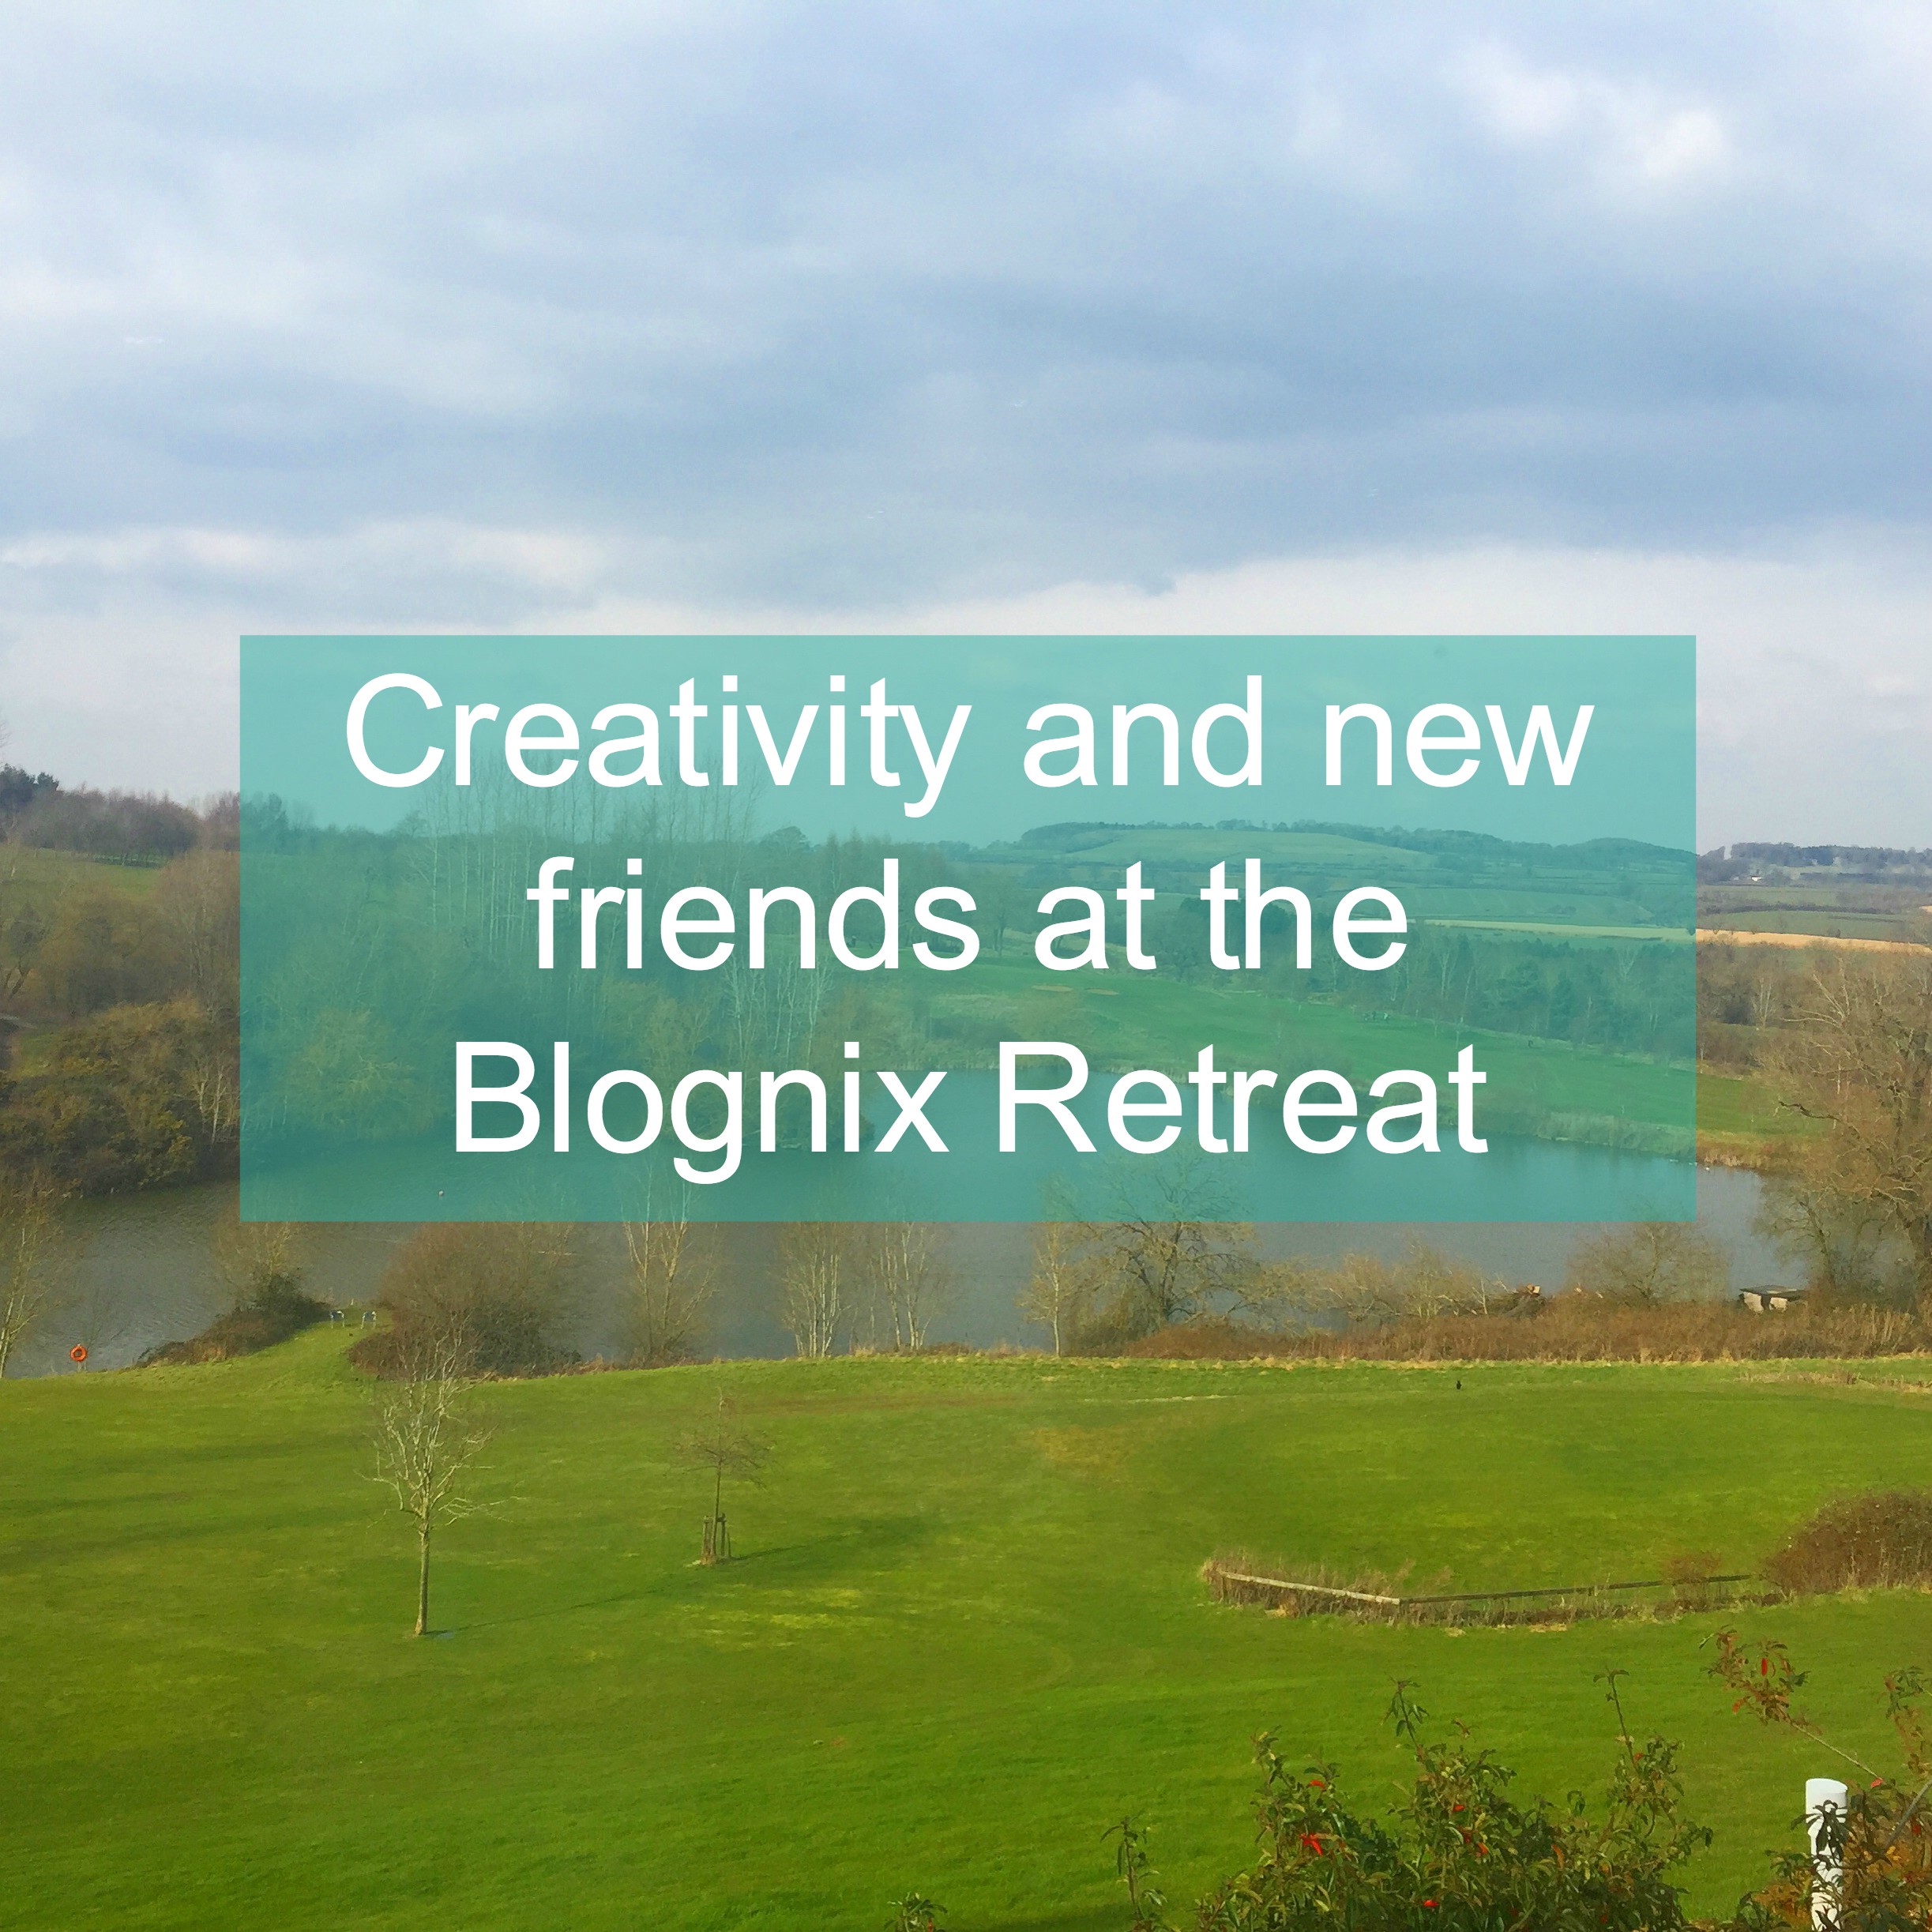 Creativity and new friends at the Blognix Retreat